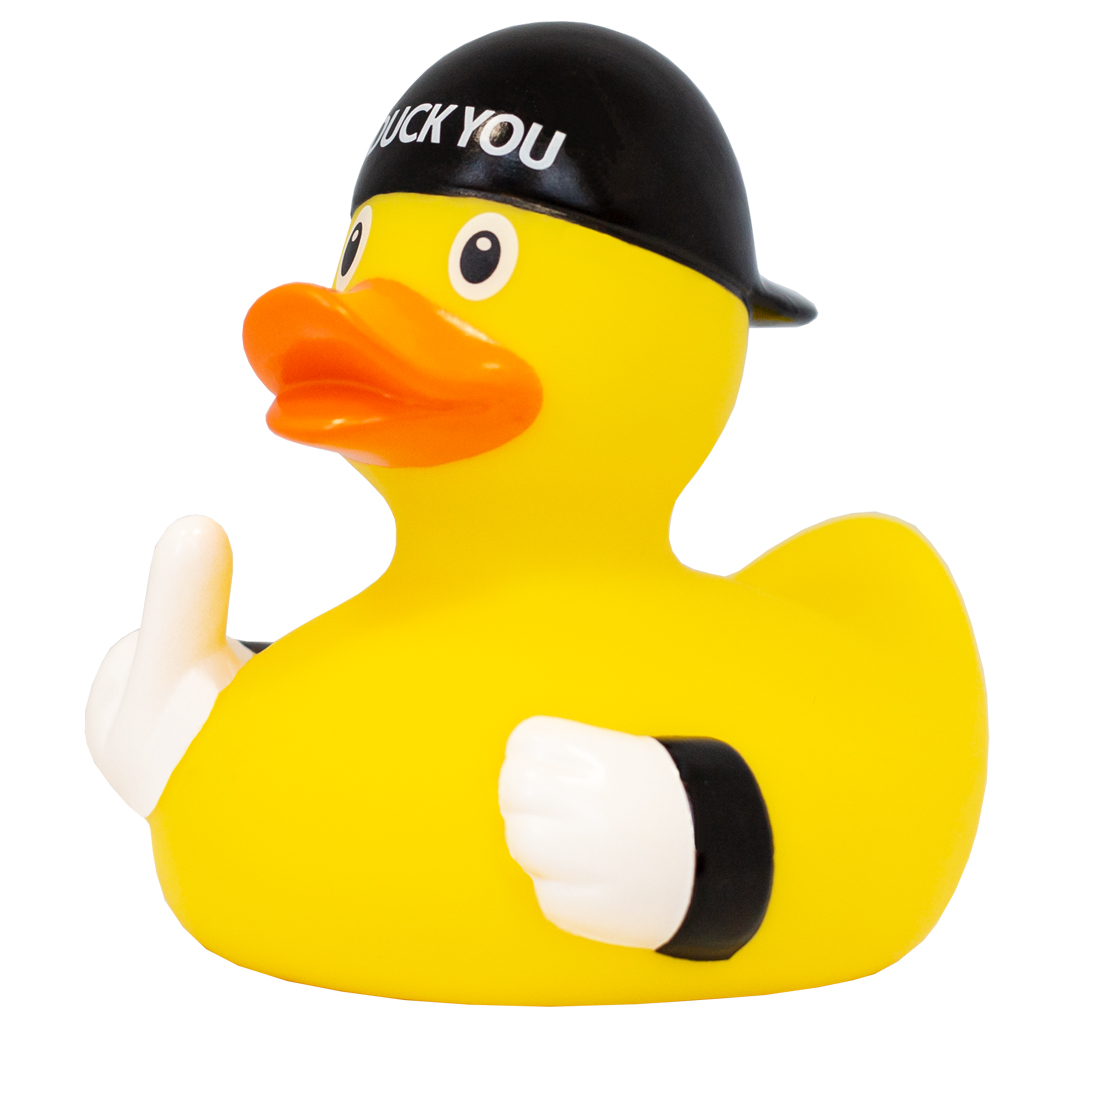 Duck You Rubber Duck - The Calendar and Gift Company